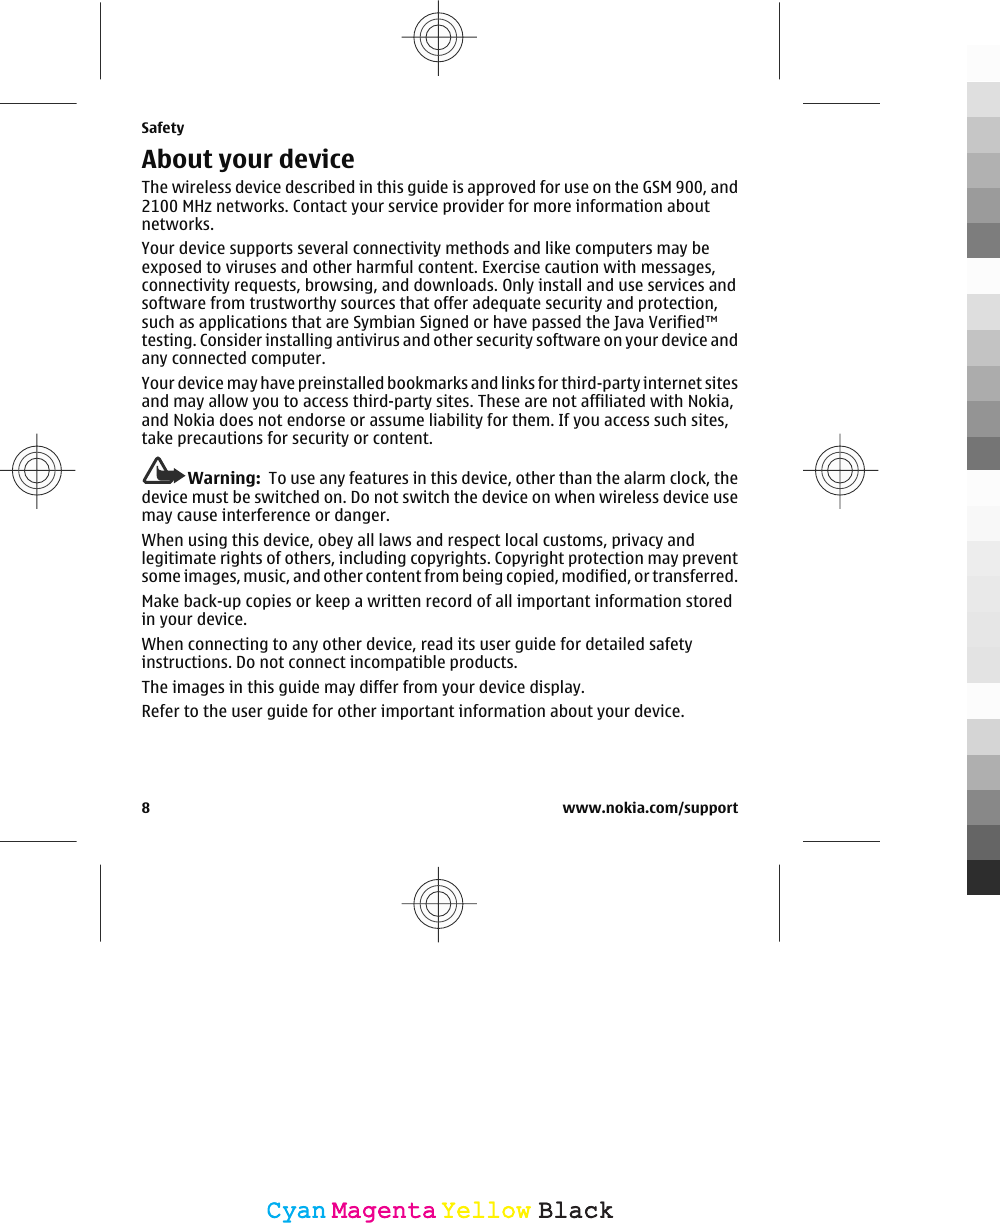 About your deviceThe wireless device described in this guide is approved for use on the GSM 900, and2100 MHz networks. Contact your service provider for more information aboutnetworks.Your device supports several connectivity methods and like computers may beexposed to viruses and other harmful content. Exercise caution with messages,connectivity requests, browsing, and downloads. Only install and use services andsoftware from trustworthy sources that offer adequate security and protection,such as applications that are Symbian Signed or have passed the Java Verified™testing. Consider installing antivirus and other security software on your device andany connected computer.Your device may have preinstalled bookmarks and links for third-party internet sitesand may allow you to access third-party sites. These are not affiliated with Nokia,and Nokia does not endorse or assume liability for them. If you access such sites,take precautions for security or content.Warning:  To use any features in this device, other than the alarm clock, thedevice must be switched on. Do not switch the device on when wireless device usemay cause interference or danger.When using this device, obey all laws and respect local customs, privacy andlegitimate rights of others, including copyrights. Copyright protection may preventsome images, music, and other content from being copied, modified, or transferred.Make back-up copies or keep a written record of all important information storedin your device.When connecting to any other device, read its user guide for detailed safetyinstructions. Do not connect incompatible products.The images in this guide may differ from your device display.Refer to the user guide for other important information about your device.Safety8 www.nokia.com/supportCyanCyanMagentaMagentaYellowYellowBlackBlack